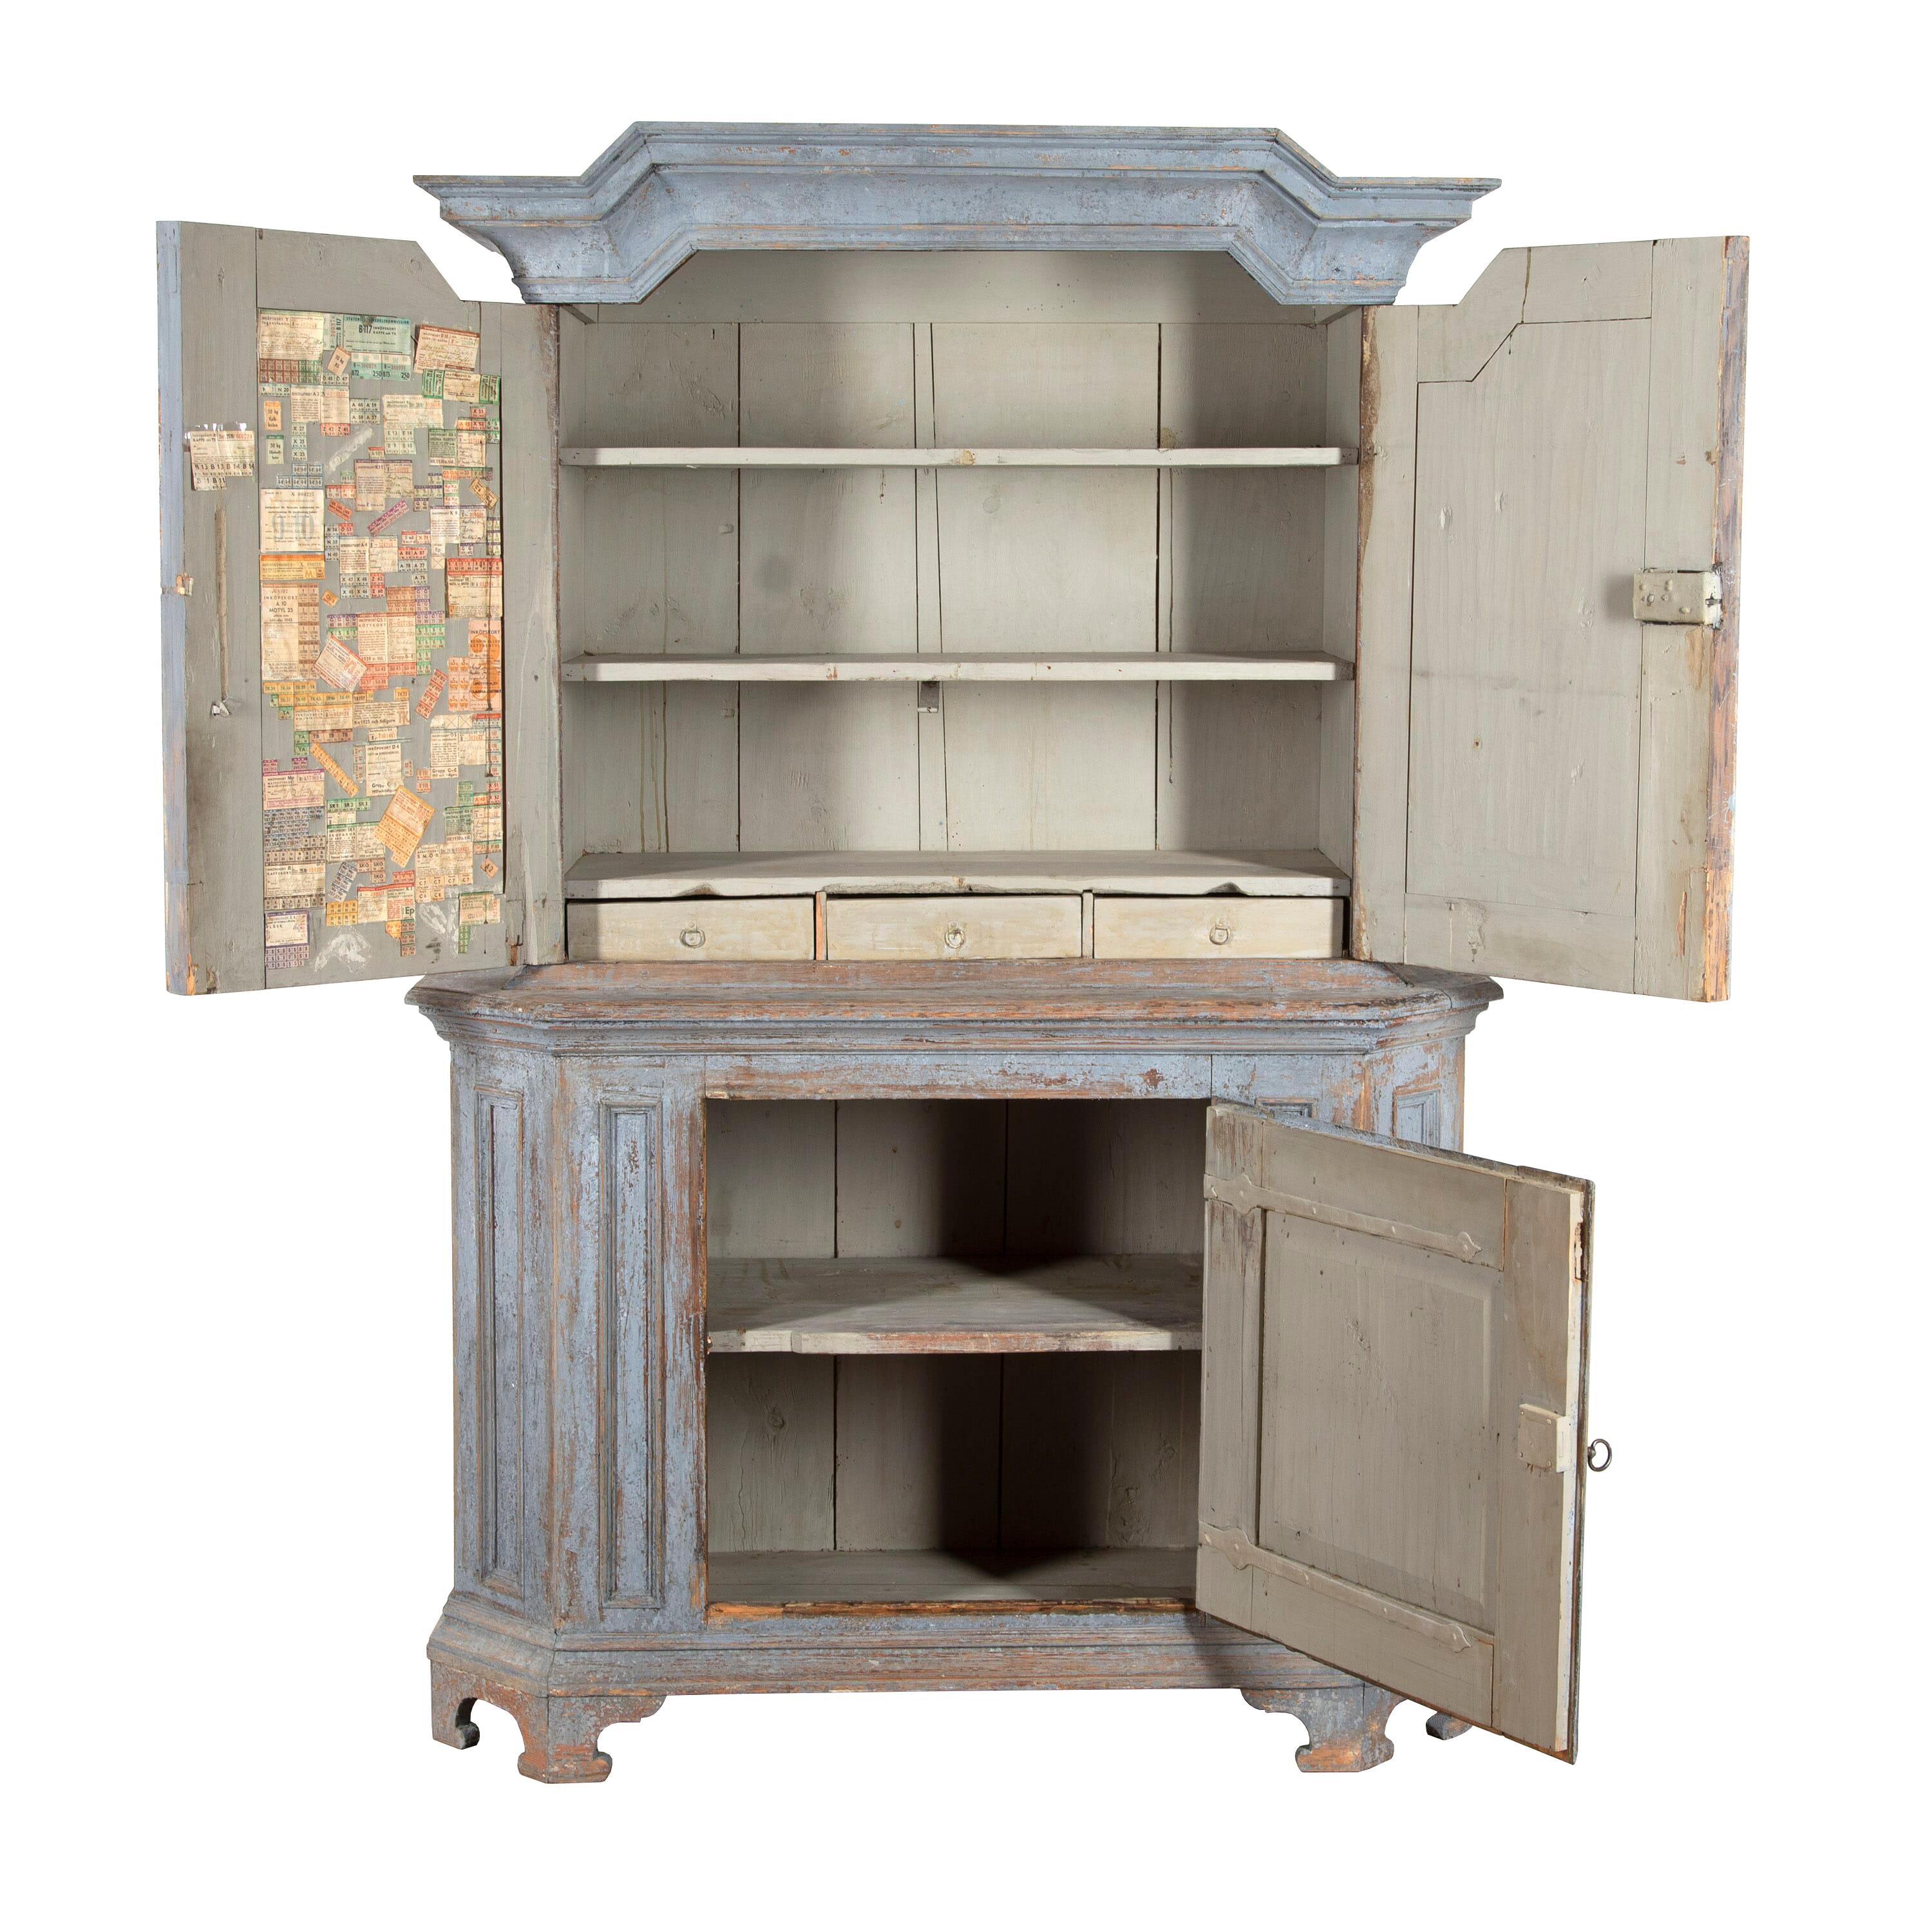 Swedish Baroque cabinet from the province of Bergsalgen.
This charming cabinet comprises of two sections, the top being slimmer than the bottom. The top section offers two panelled and decoratively painted doors with storage inside. The bottom